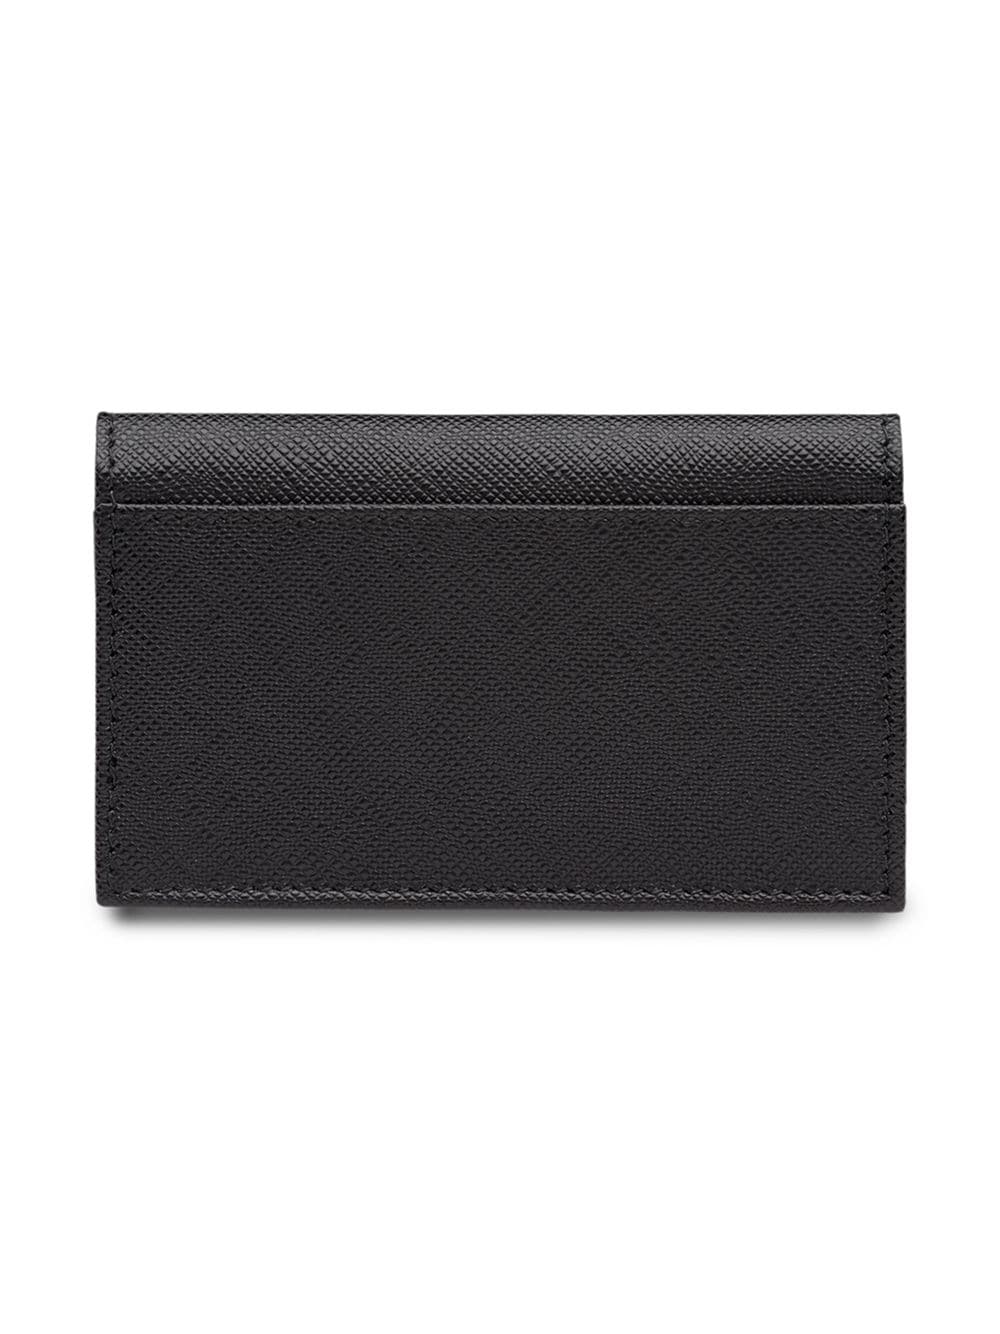 Saffiano leather front logo wallet